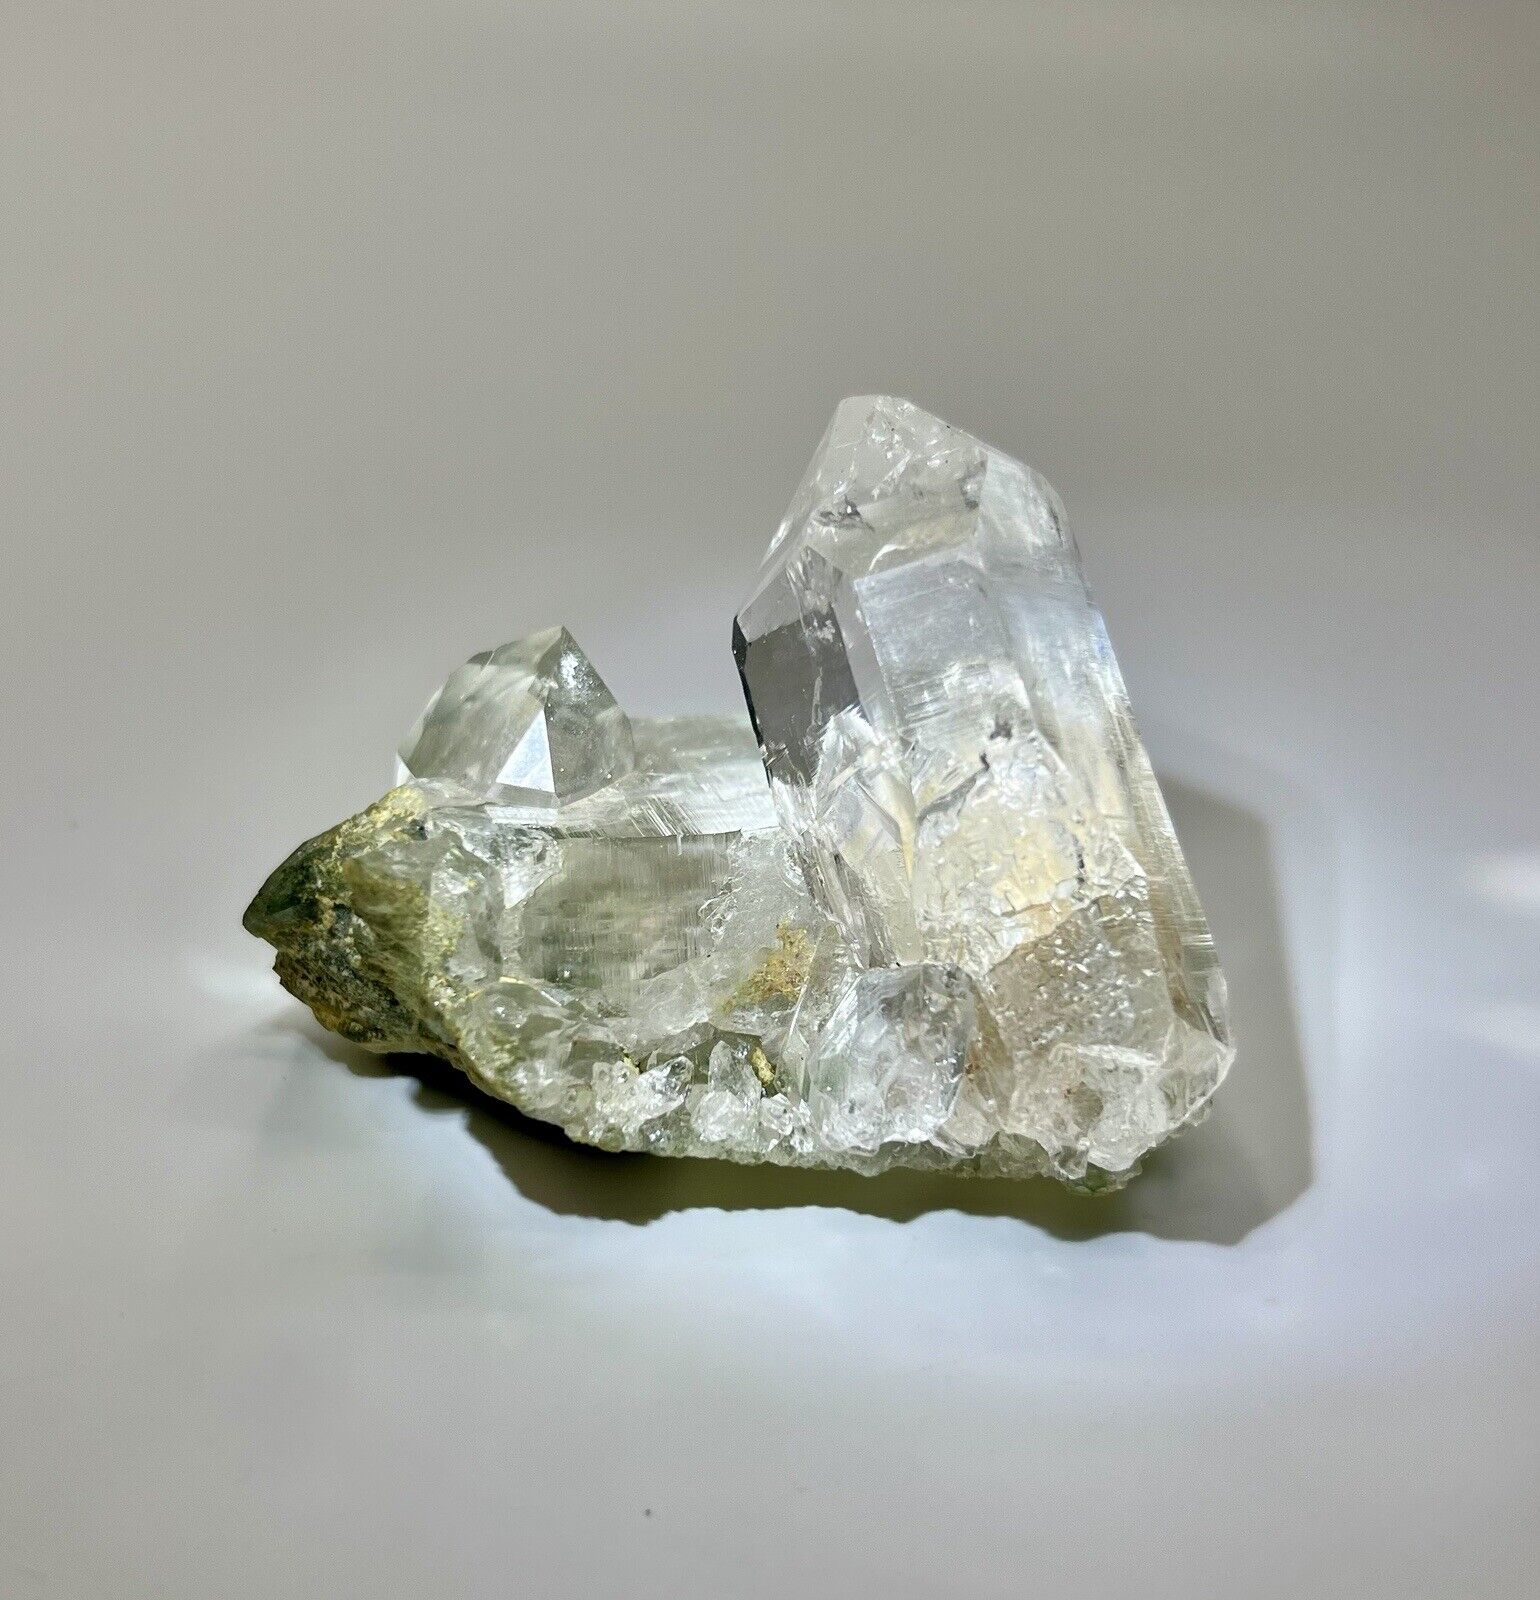 Crystal Himalayan Quartz With Chlorite AAA quality, High Altitude High Vibration